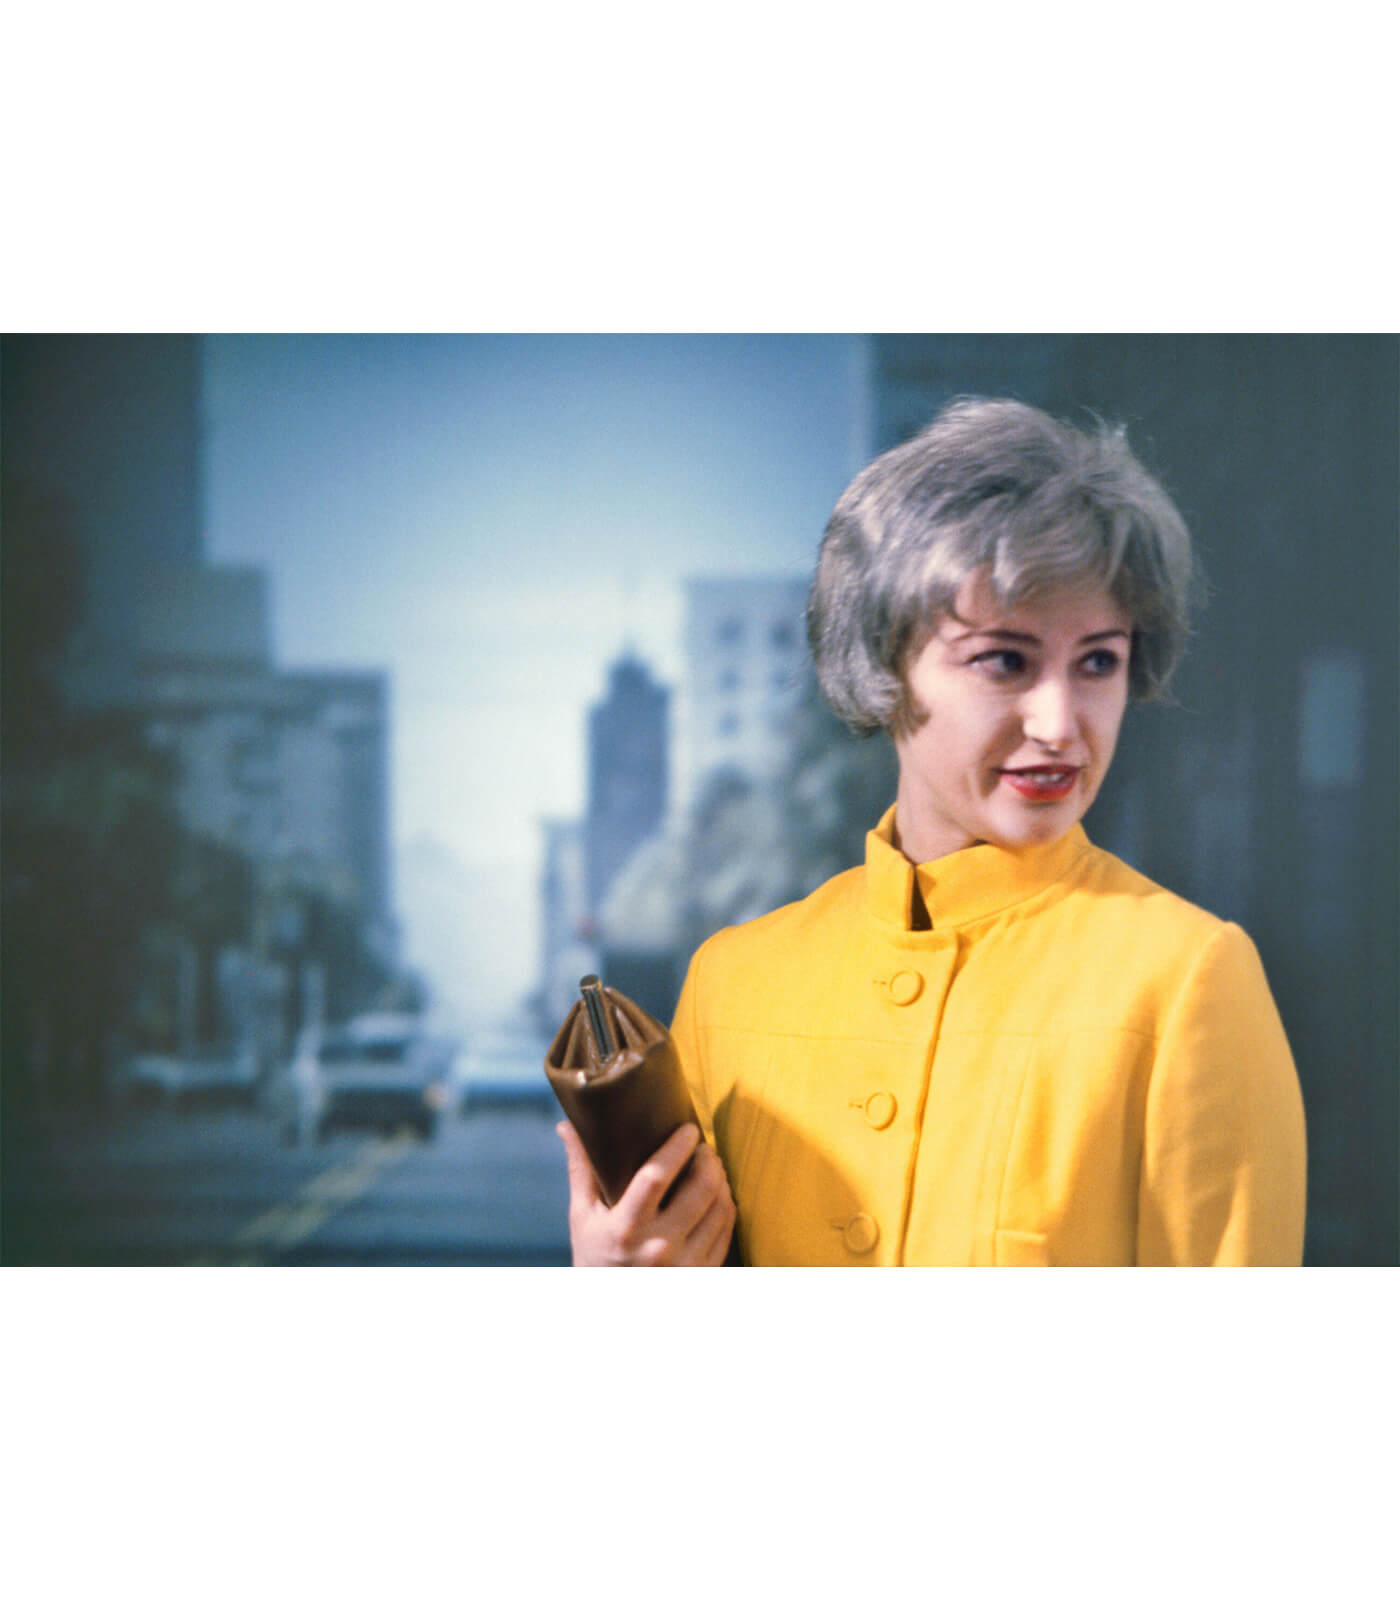 Exhibition: 'Cindy Sherman – Untitled Horrors' at the Astrup